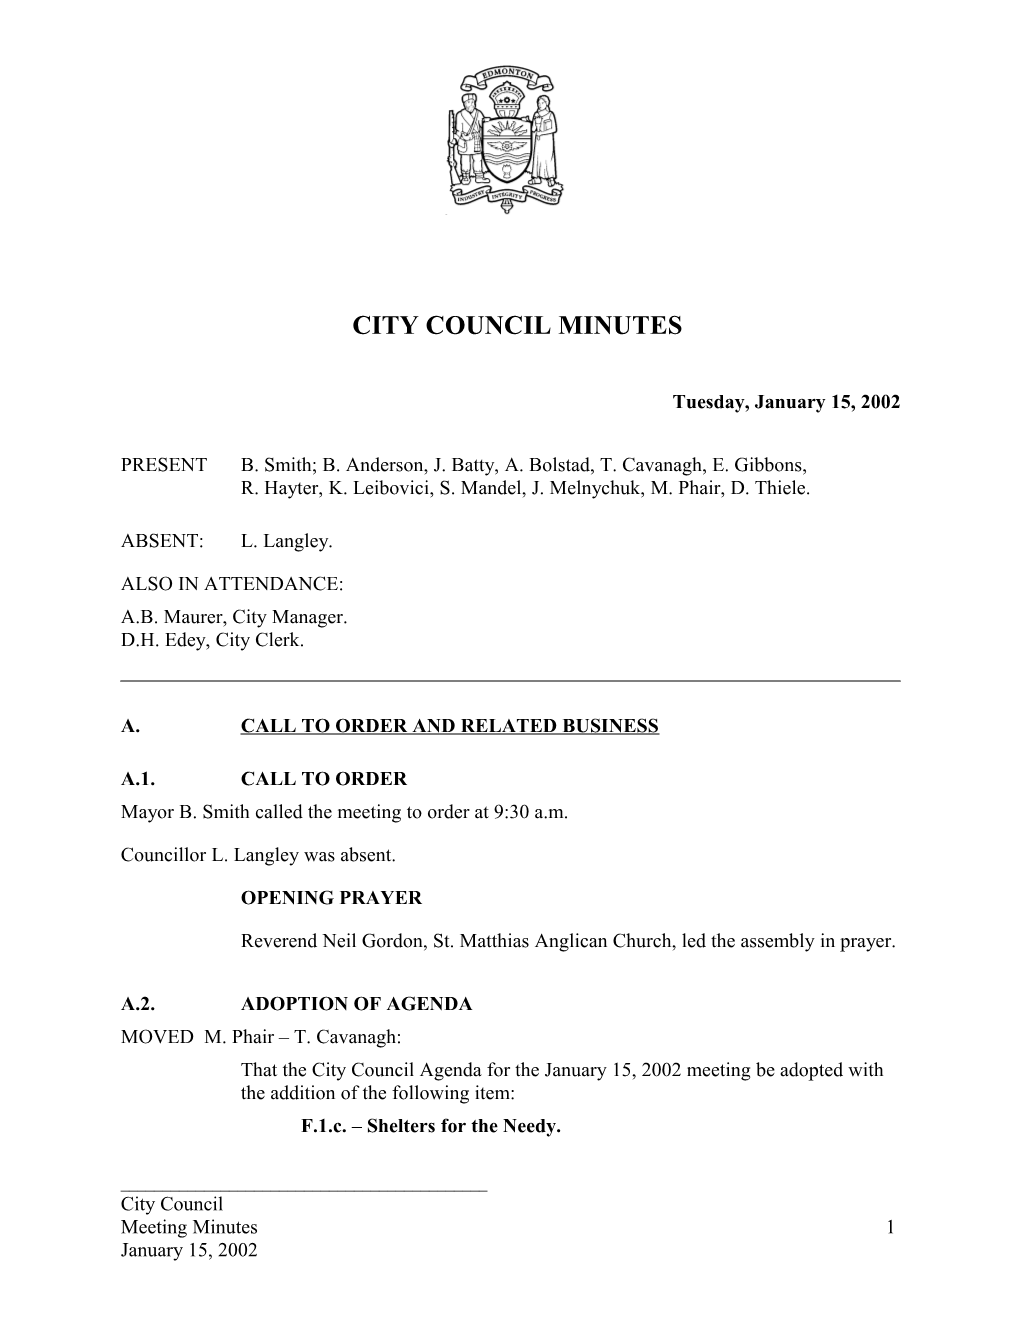 Minutes for City Council January 15, 2002 Meeting